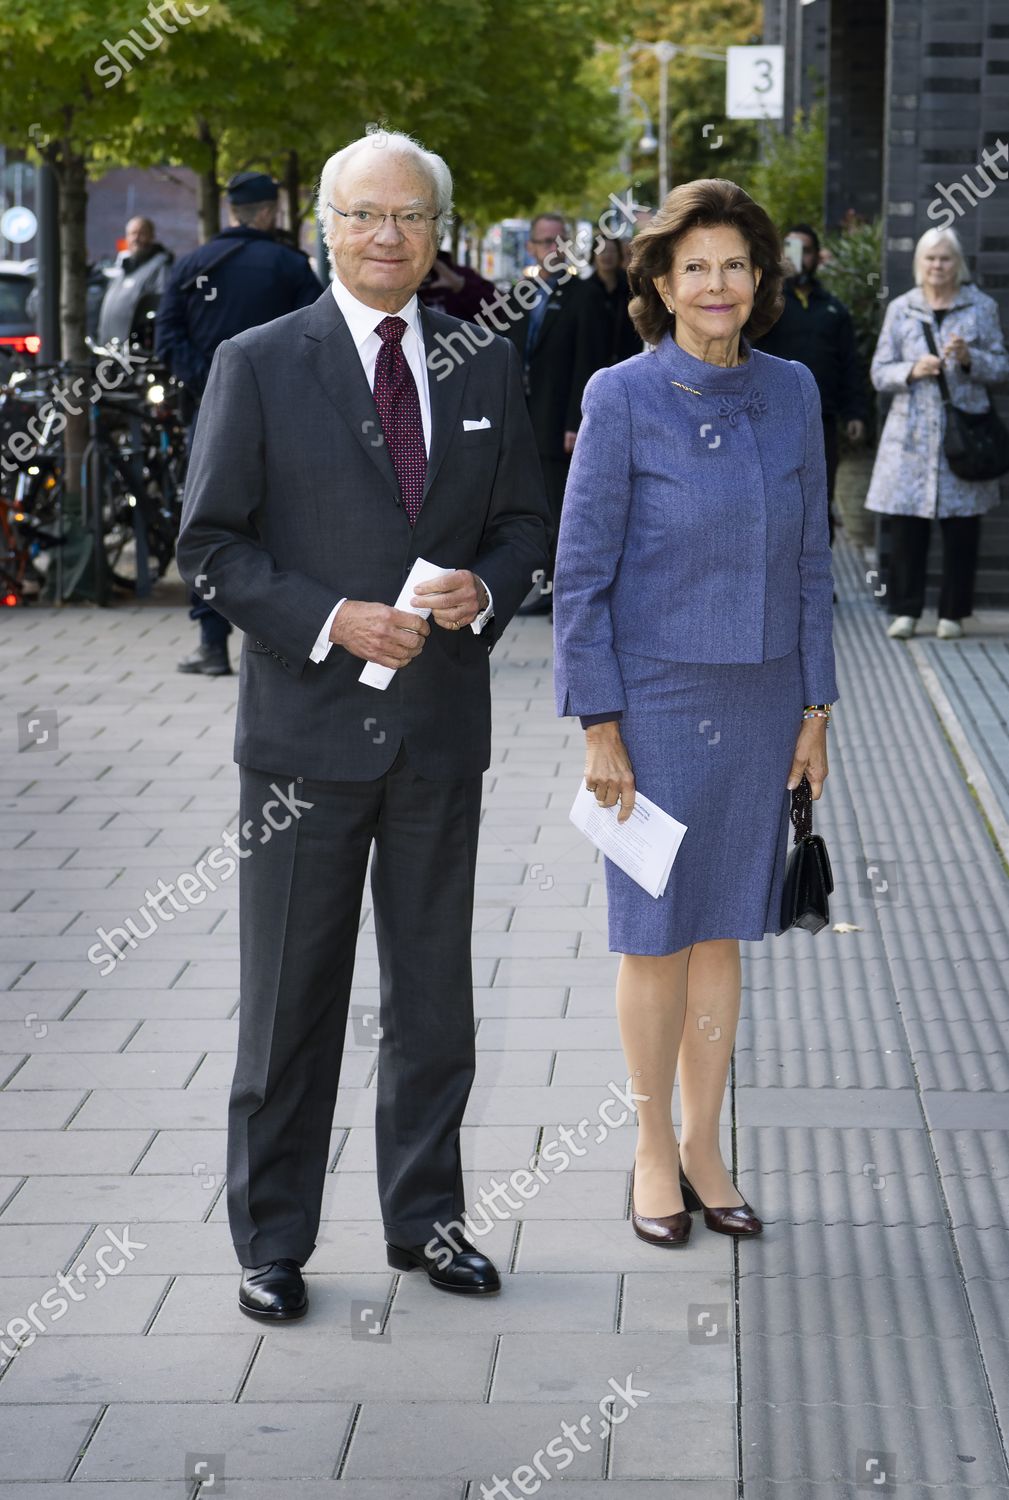 king-carl-gustaf-and-queen-silvia-visit-stockholm-county-sweden-shutterstock-editorial-10952011c.jpg